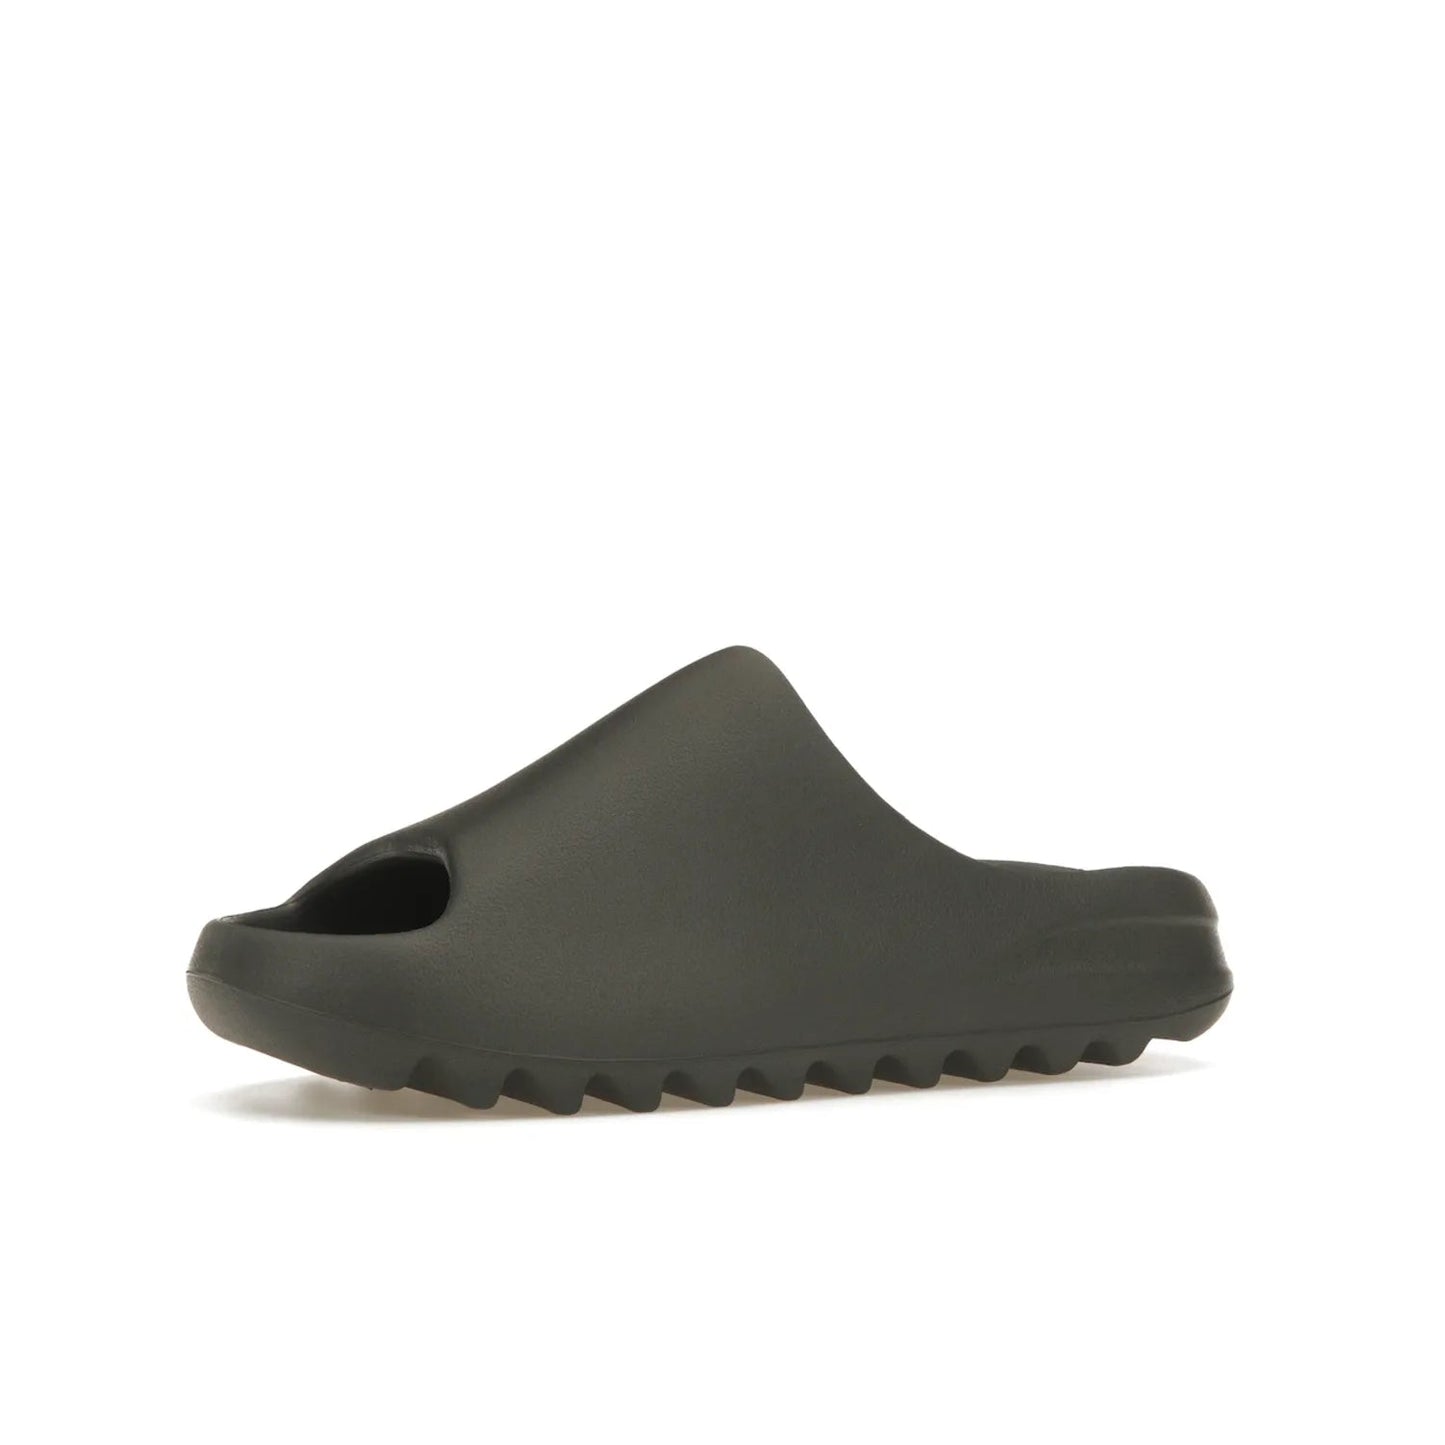 adidas Yeezy Slide Granite - Image 16 - Only at www.BallersClubKickz.com - Introducing the adidas Yeezy Slide Granite with a sleek, soft-to-touch one-piece upper – perfect for making a statement with its minimalistic design and luxurious comfort. Get yours now for only $70.